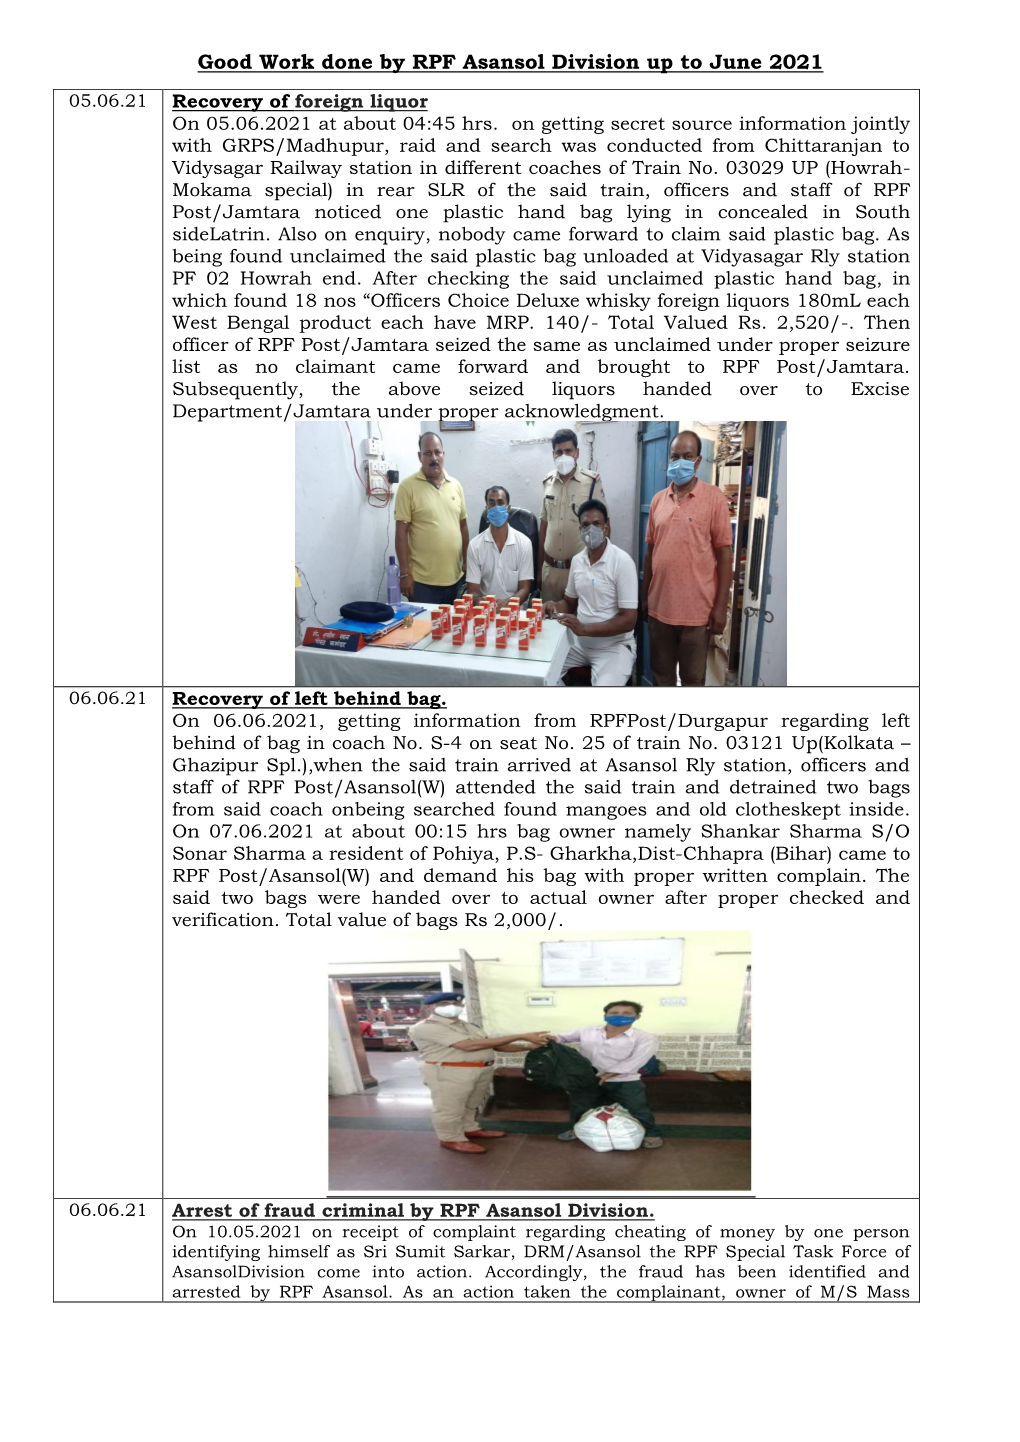 Good Work Done by RPF Asansol Division up to June 2021